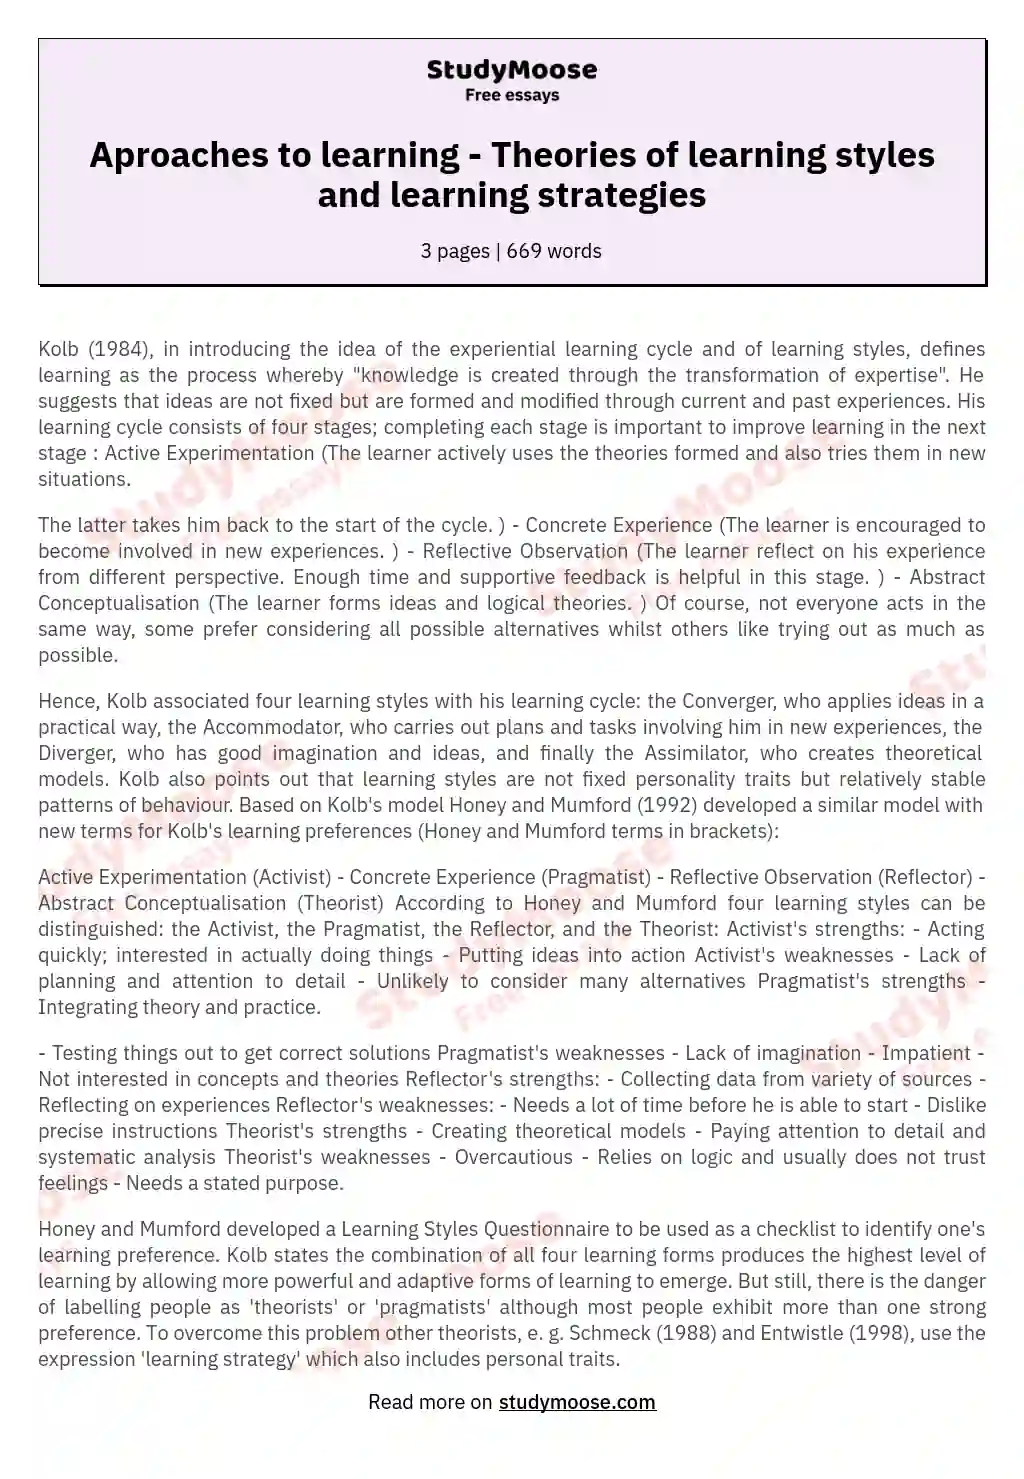 Aproaches to learning - Theories of learning styles and learning strategies essay